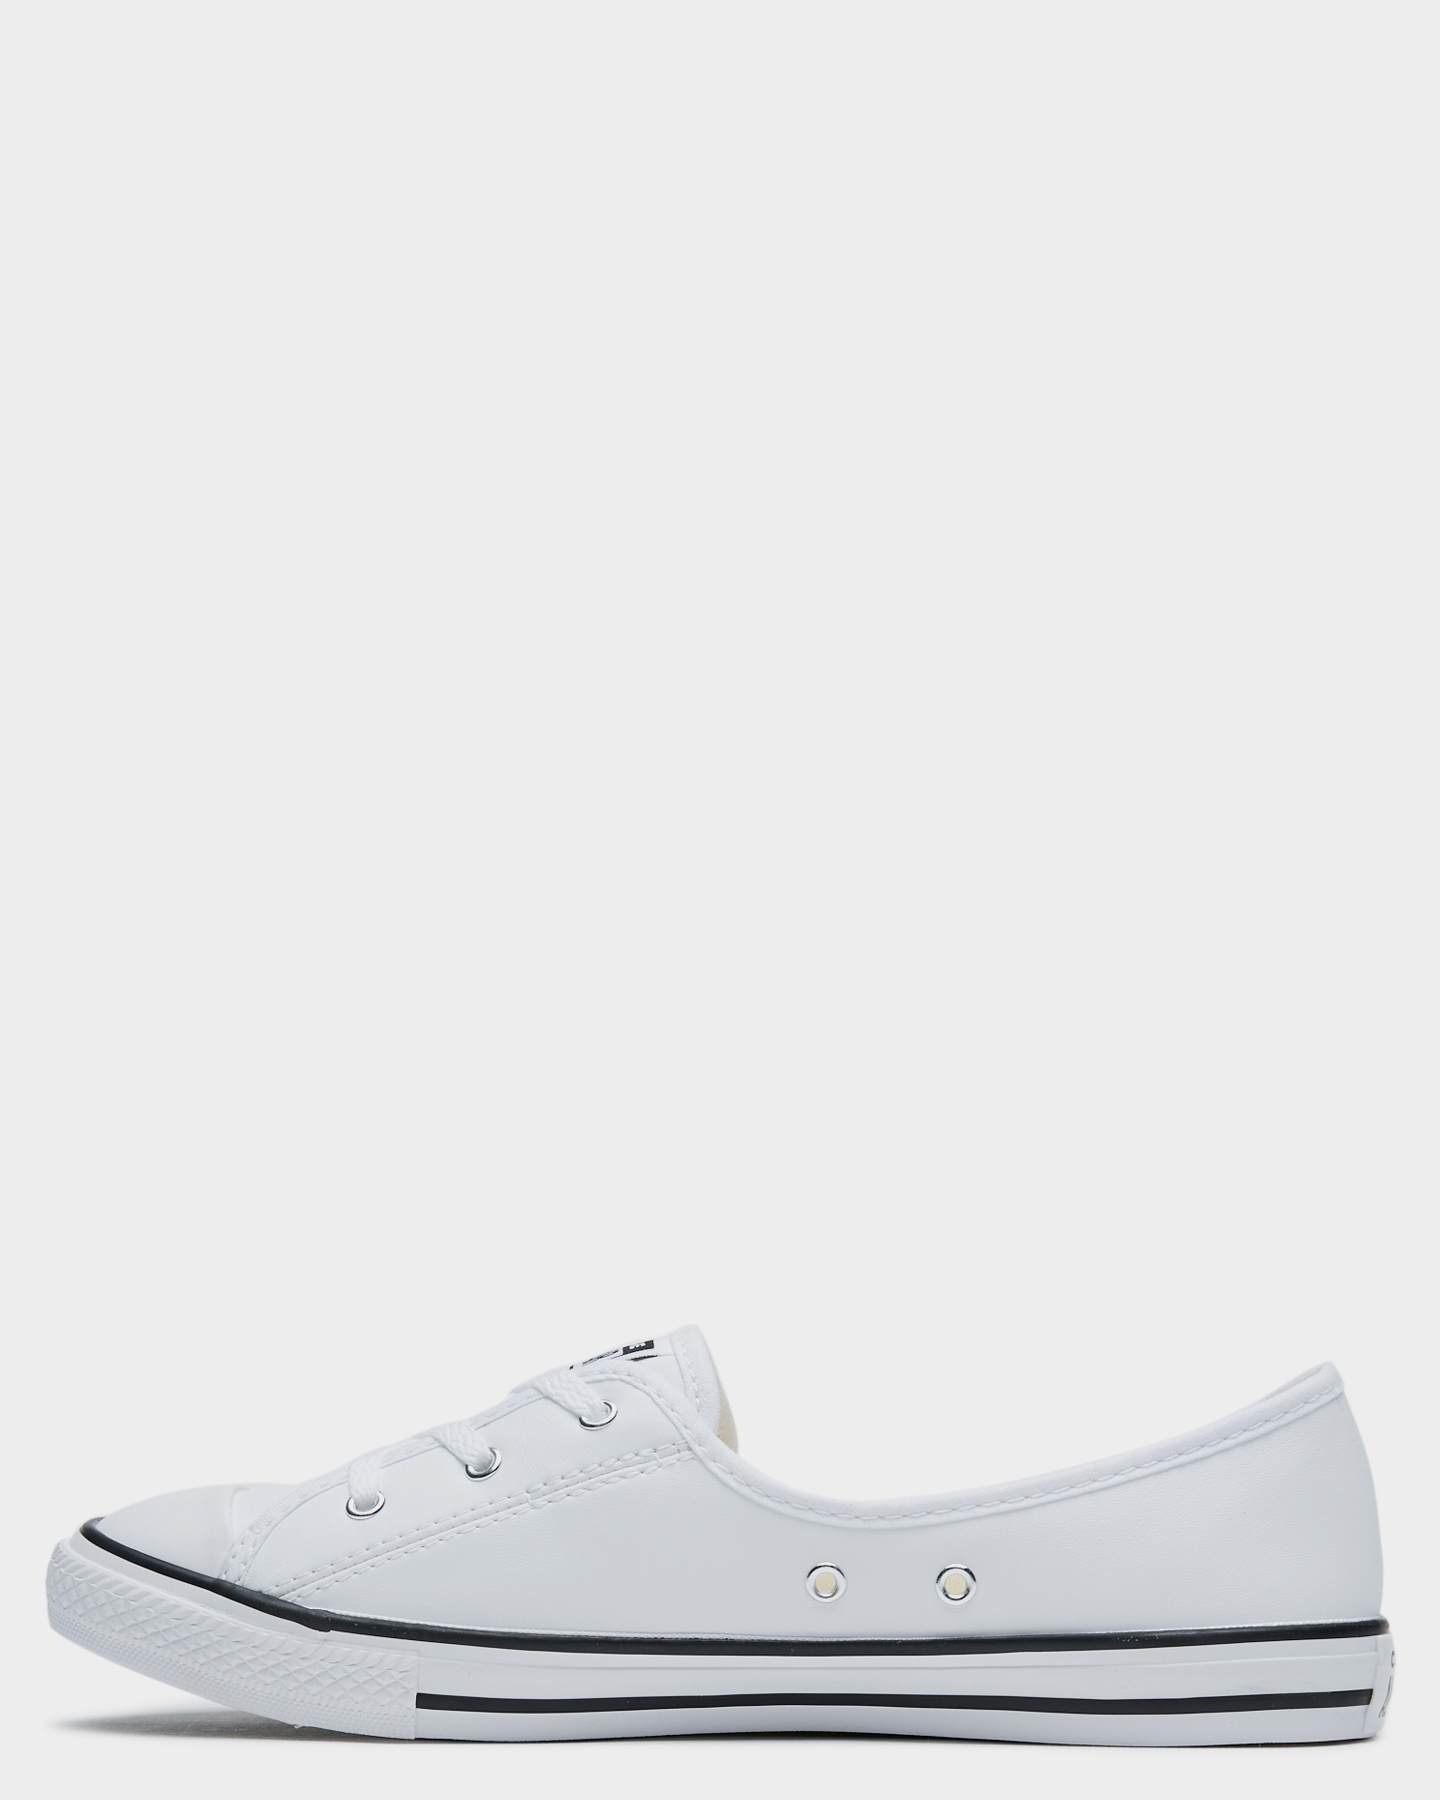 Converse Chuck Taylor All Star Ballet Lace Faux Leather Shoe - White ...